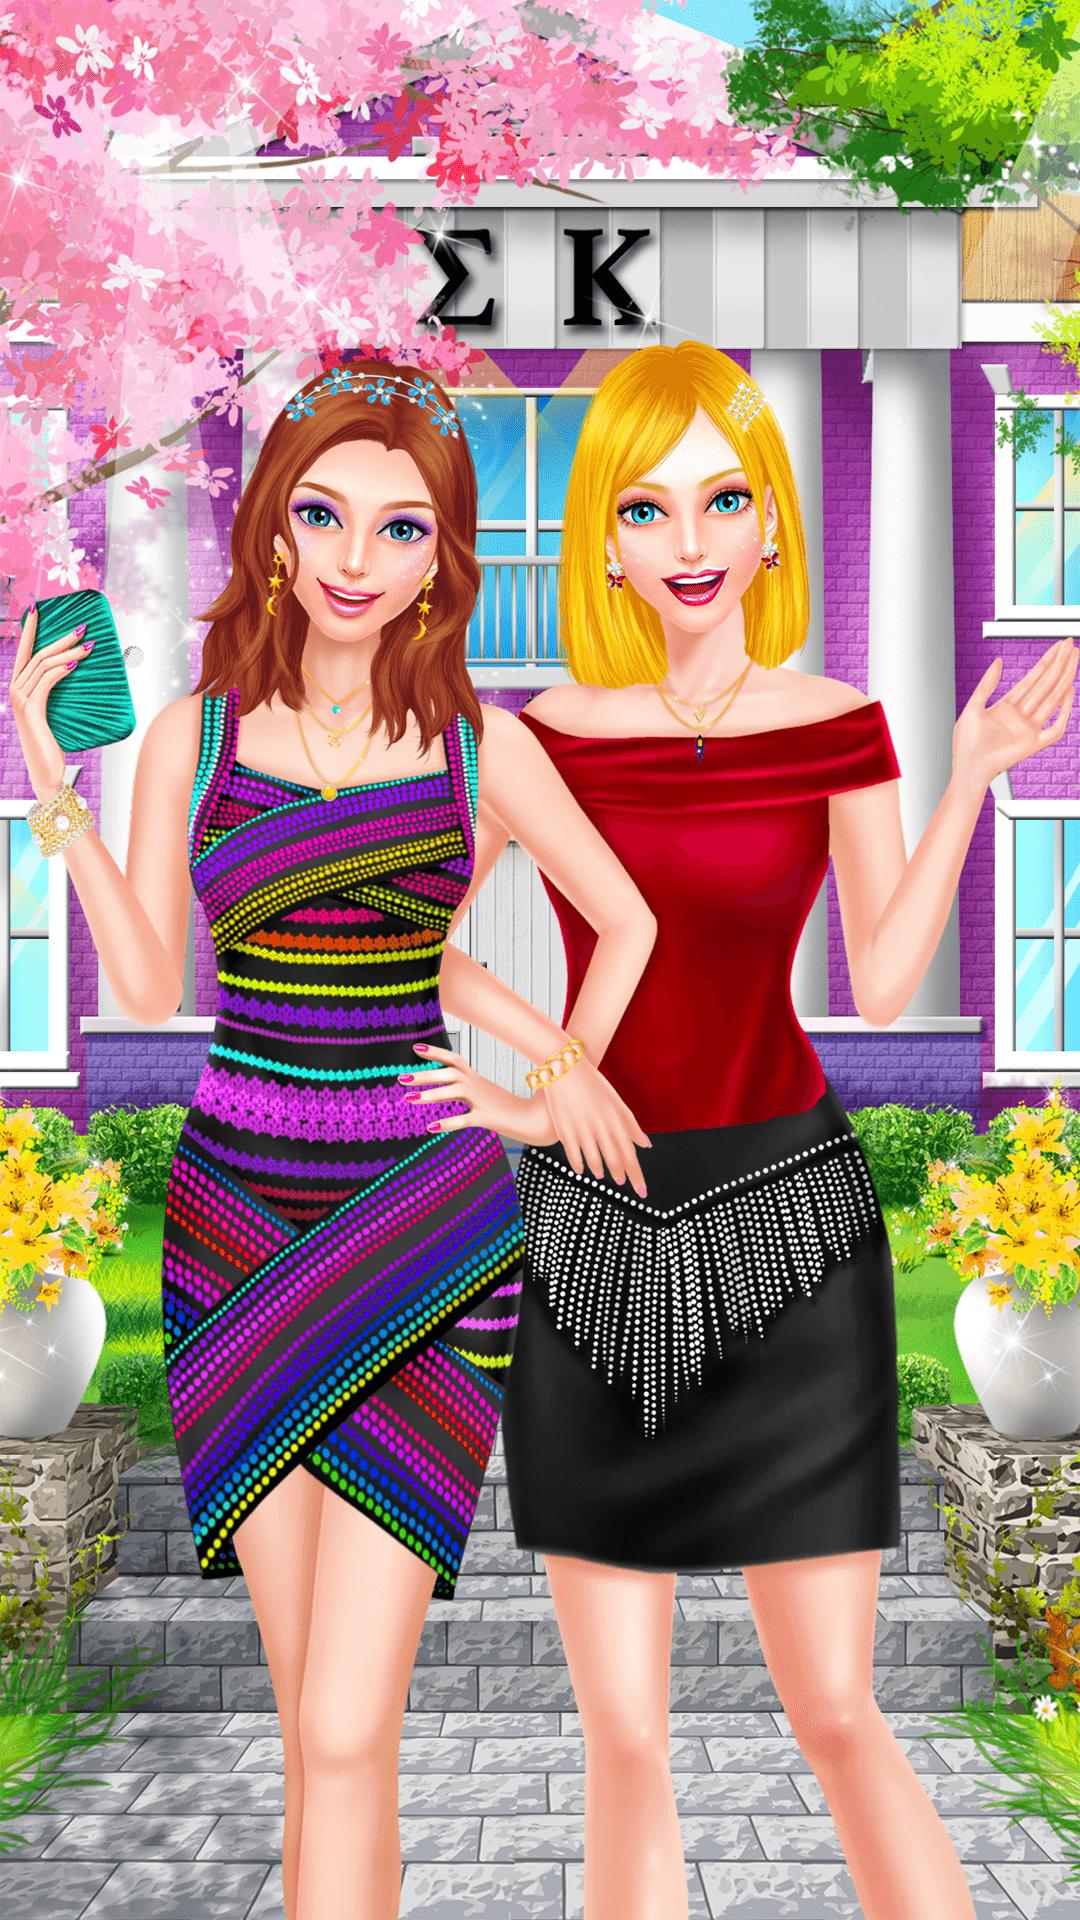 Sisters android. Сестру Android APK. Sorority Salon game Android.